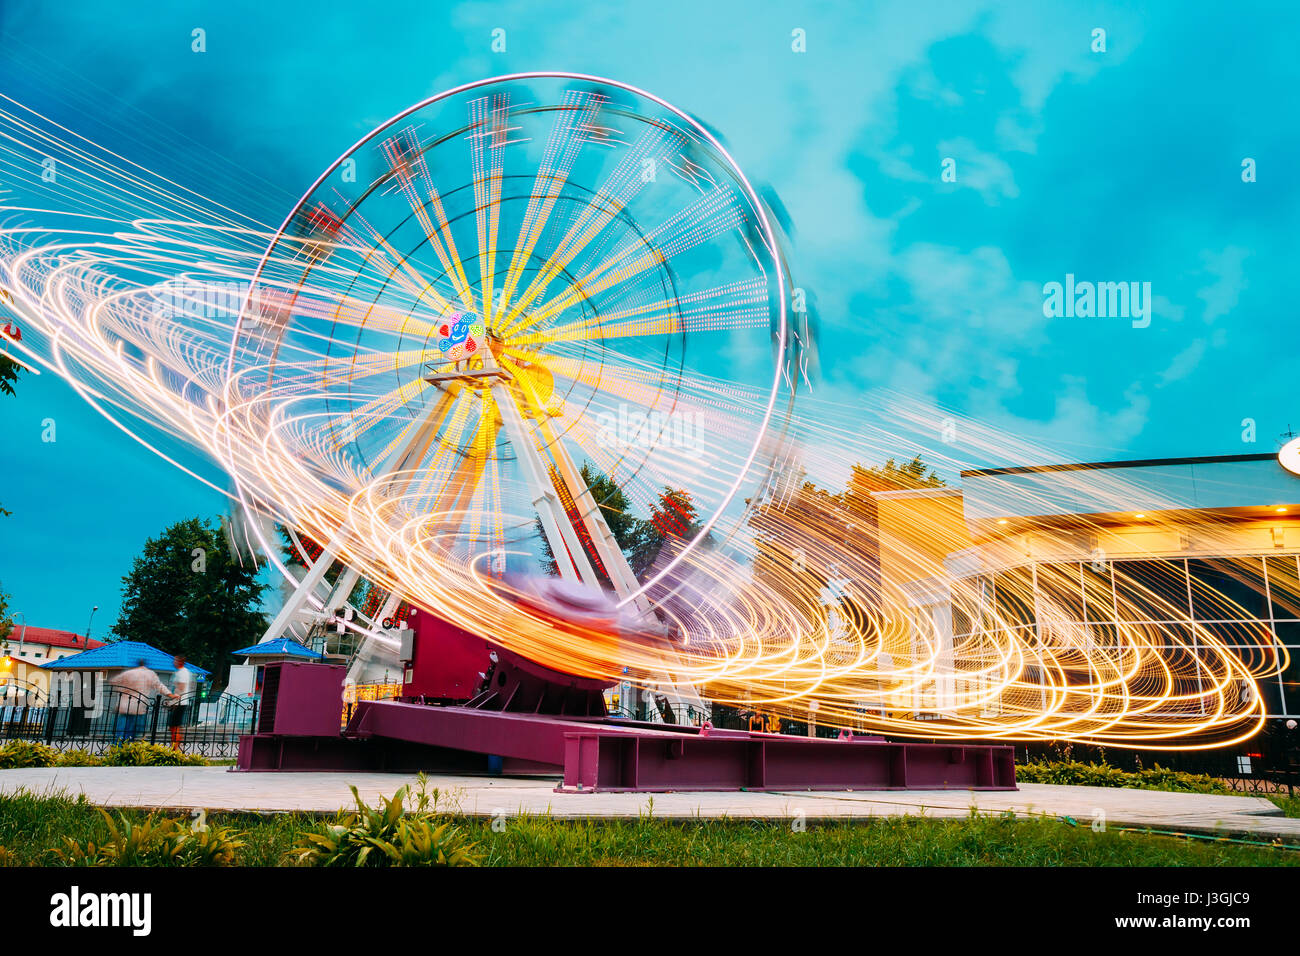 Motion Blurred Effect Around Of High Speed Rotating Illuminated Attraction Feature In City Amusement Park. Ferris Wheel On Summer Evening Blue Sky Bac Stock Photo